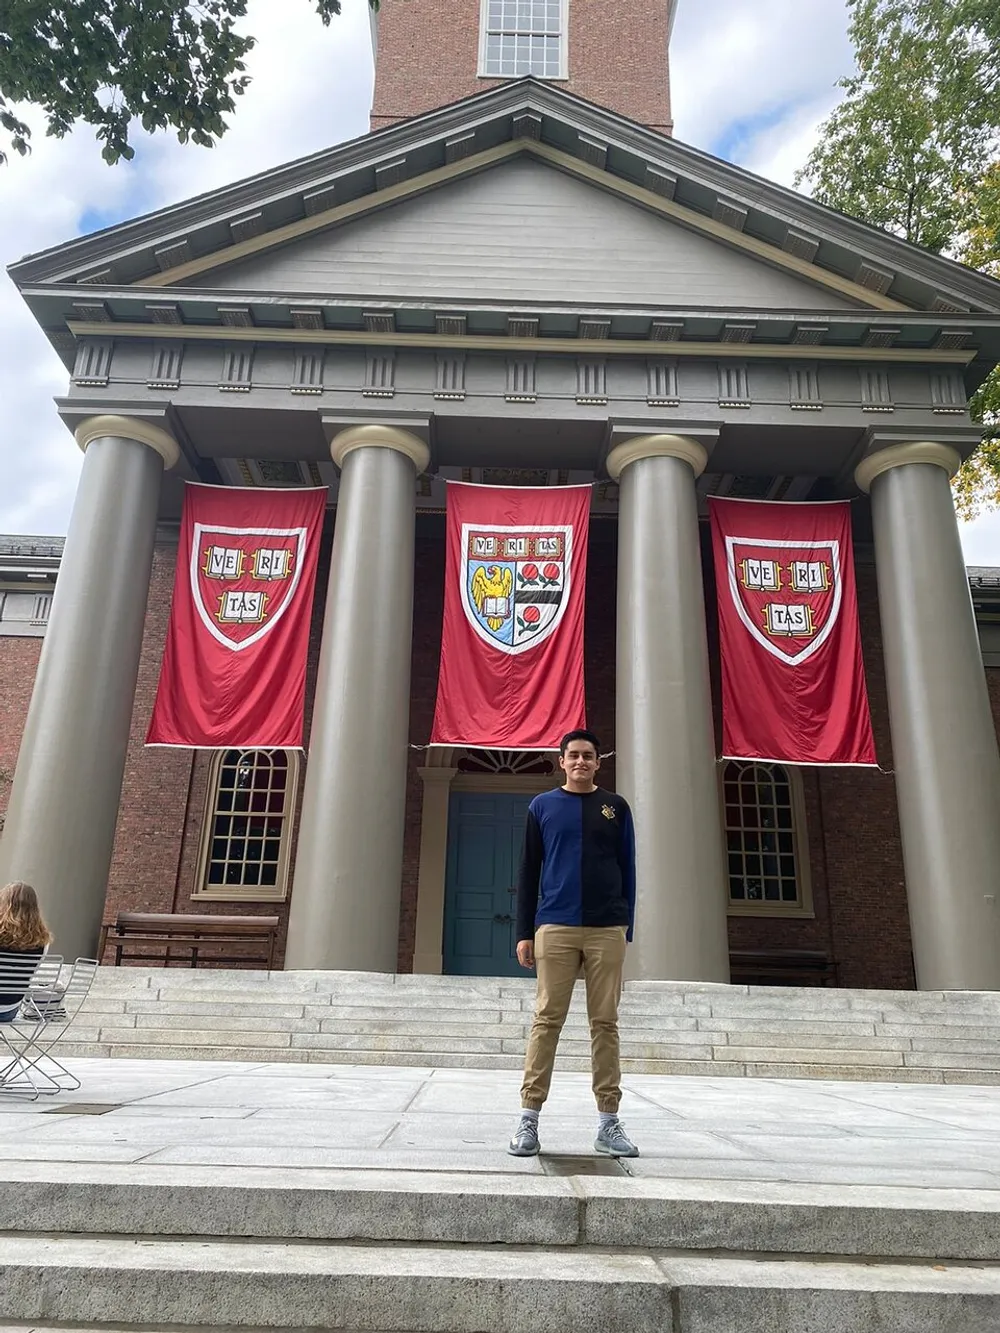 A person stands smiling at the camera in front of a building adorned with crimson banners featuring a shield emblem suggestive of a university setting